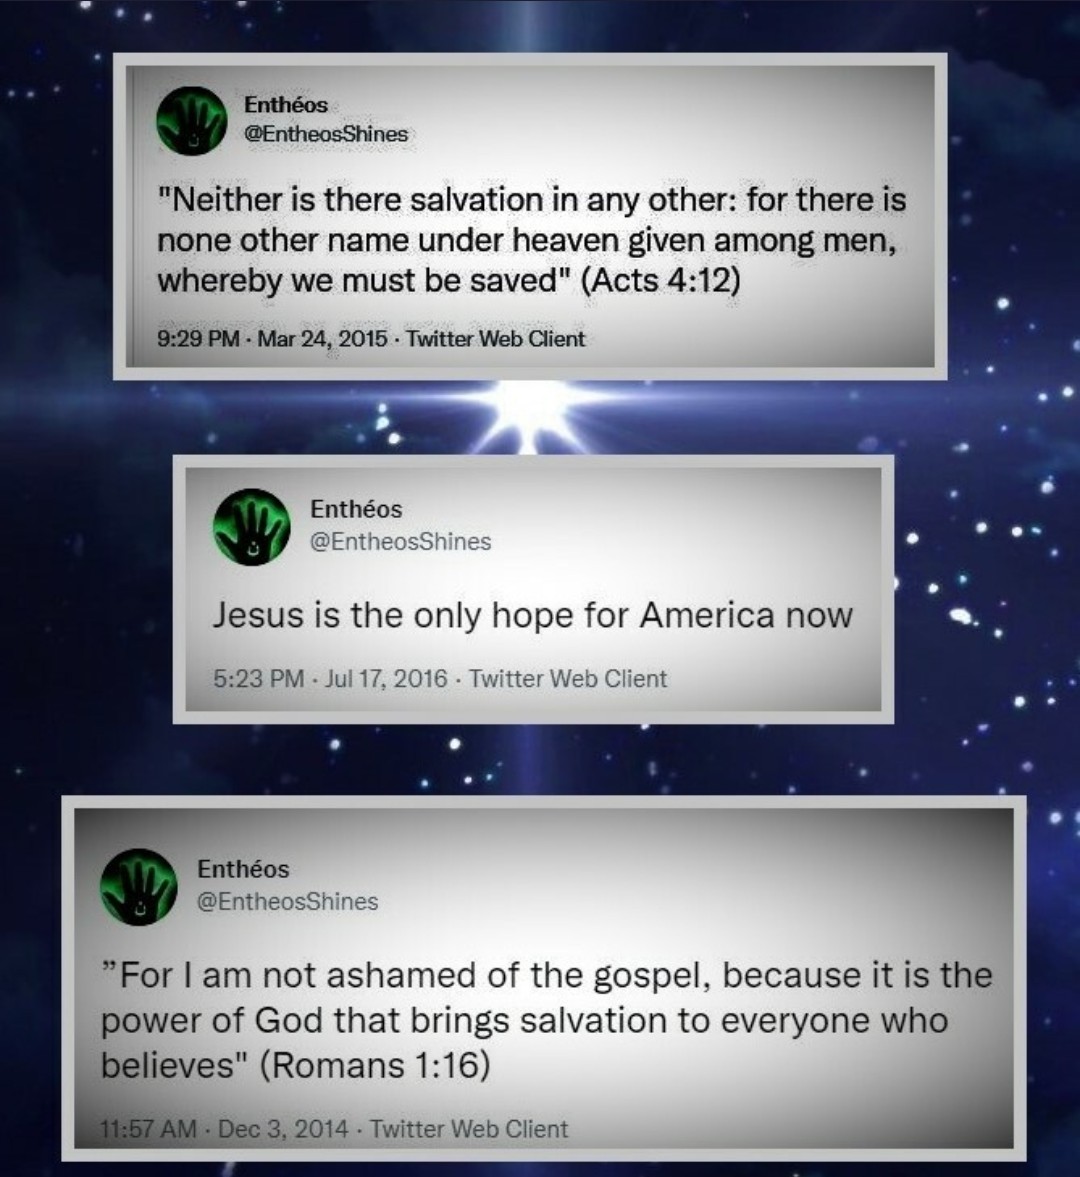 h/T @EntheosShines
Entheos on Truth Social

'Neither is there salvation in any other; for their is none other name under heaven given among men, whereby we must be saved' (Acts 4:12)

'Jesus is the only hope for America now'--Entheos

'For I am not ashamed of the Gospel, for it…